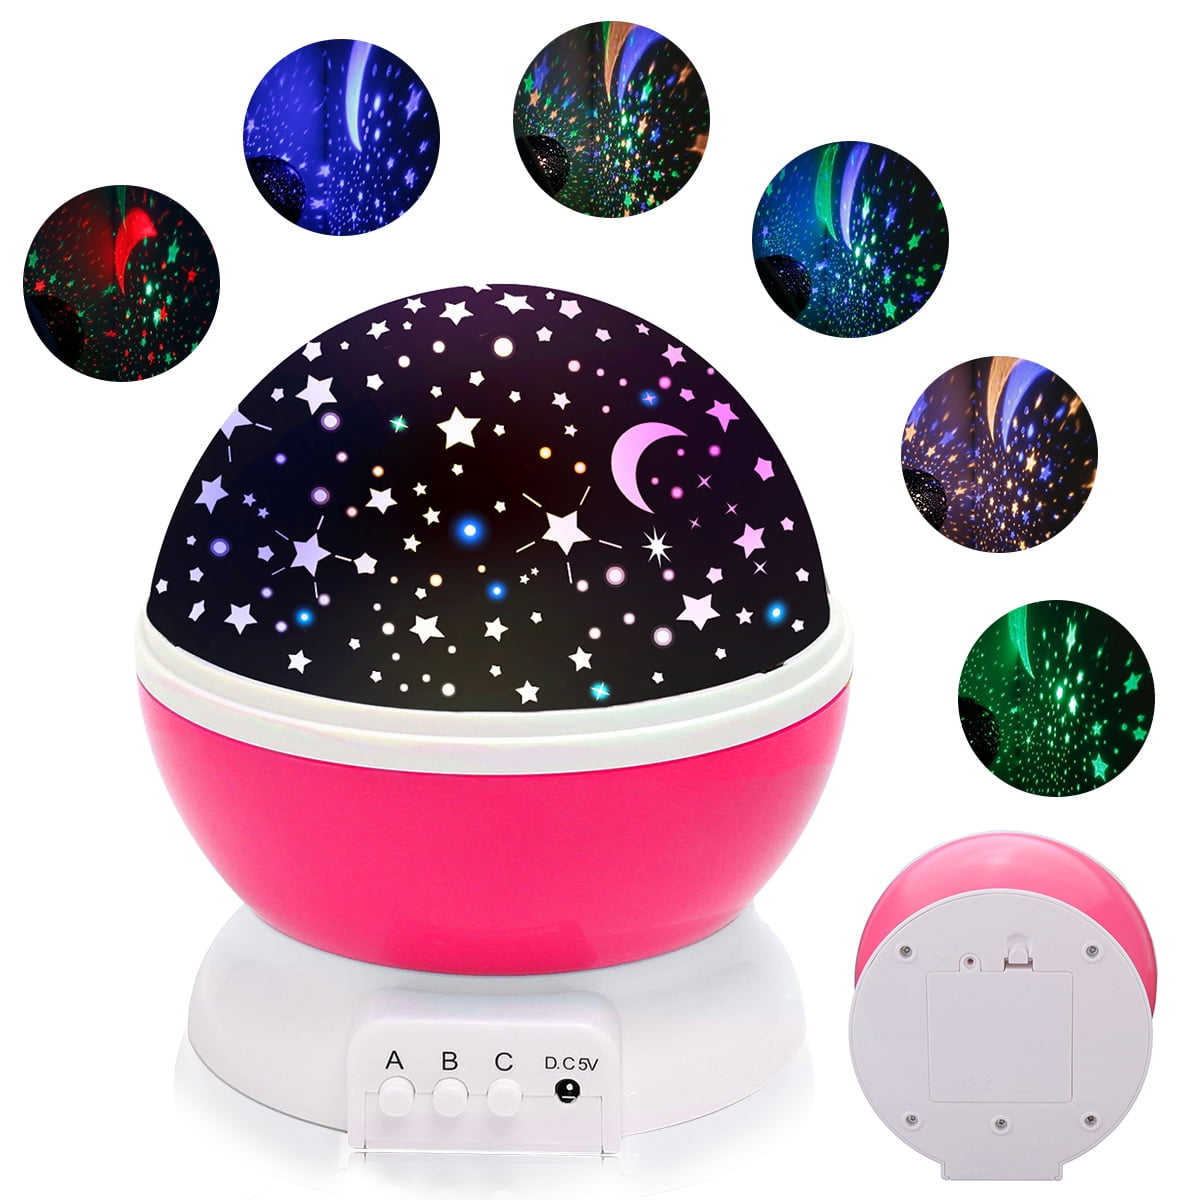 Details about   Novelty Luminous Toys Romantic Starry Sky LED Night Light Projector Battery USB 